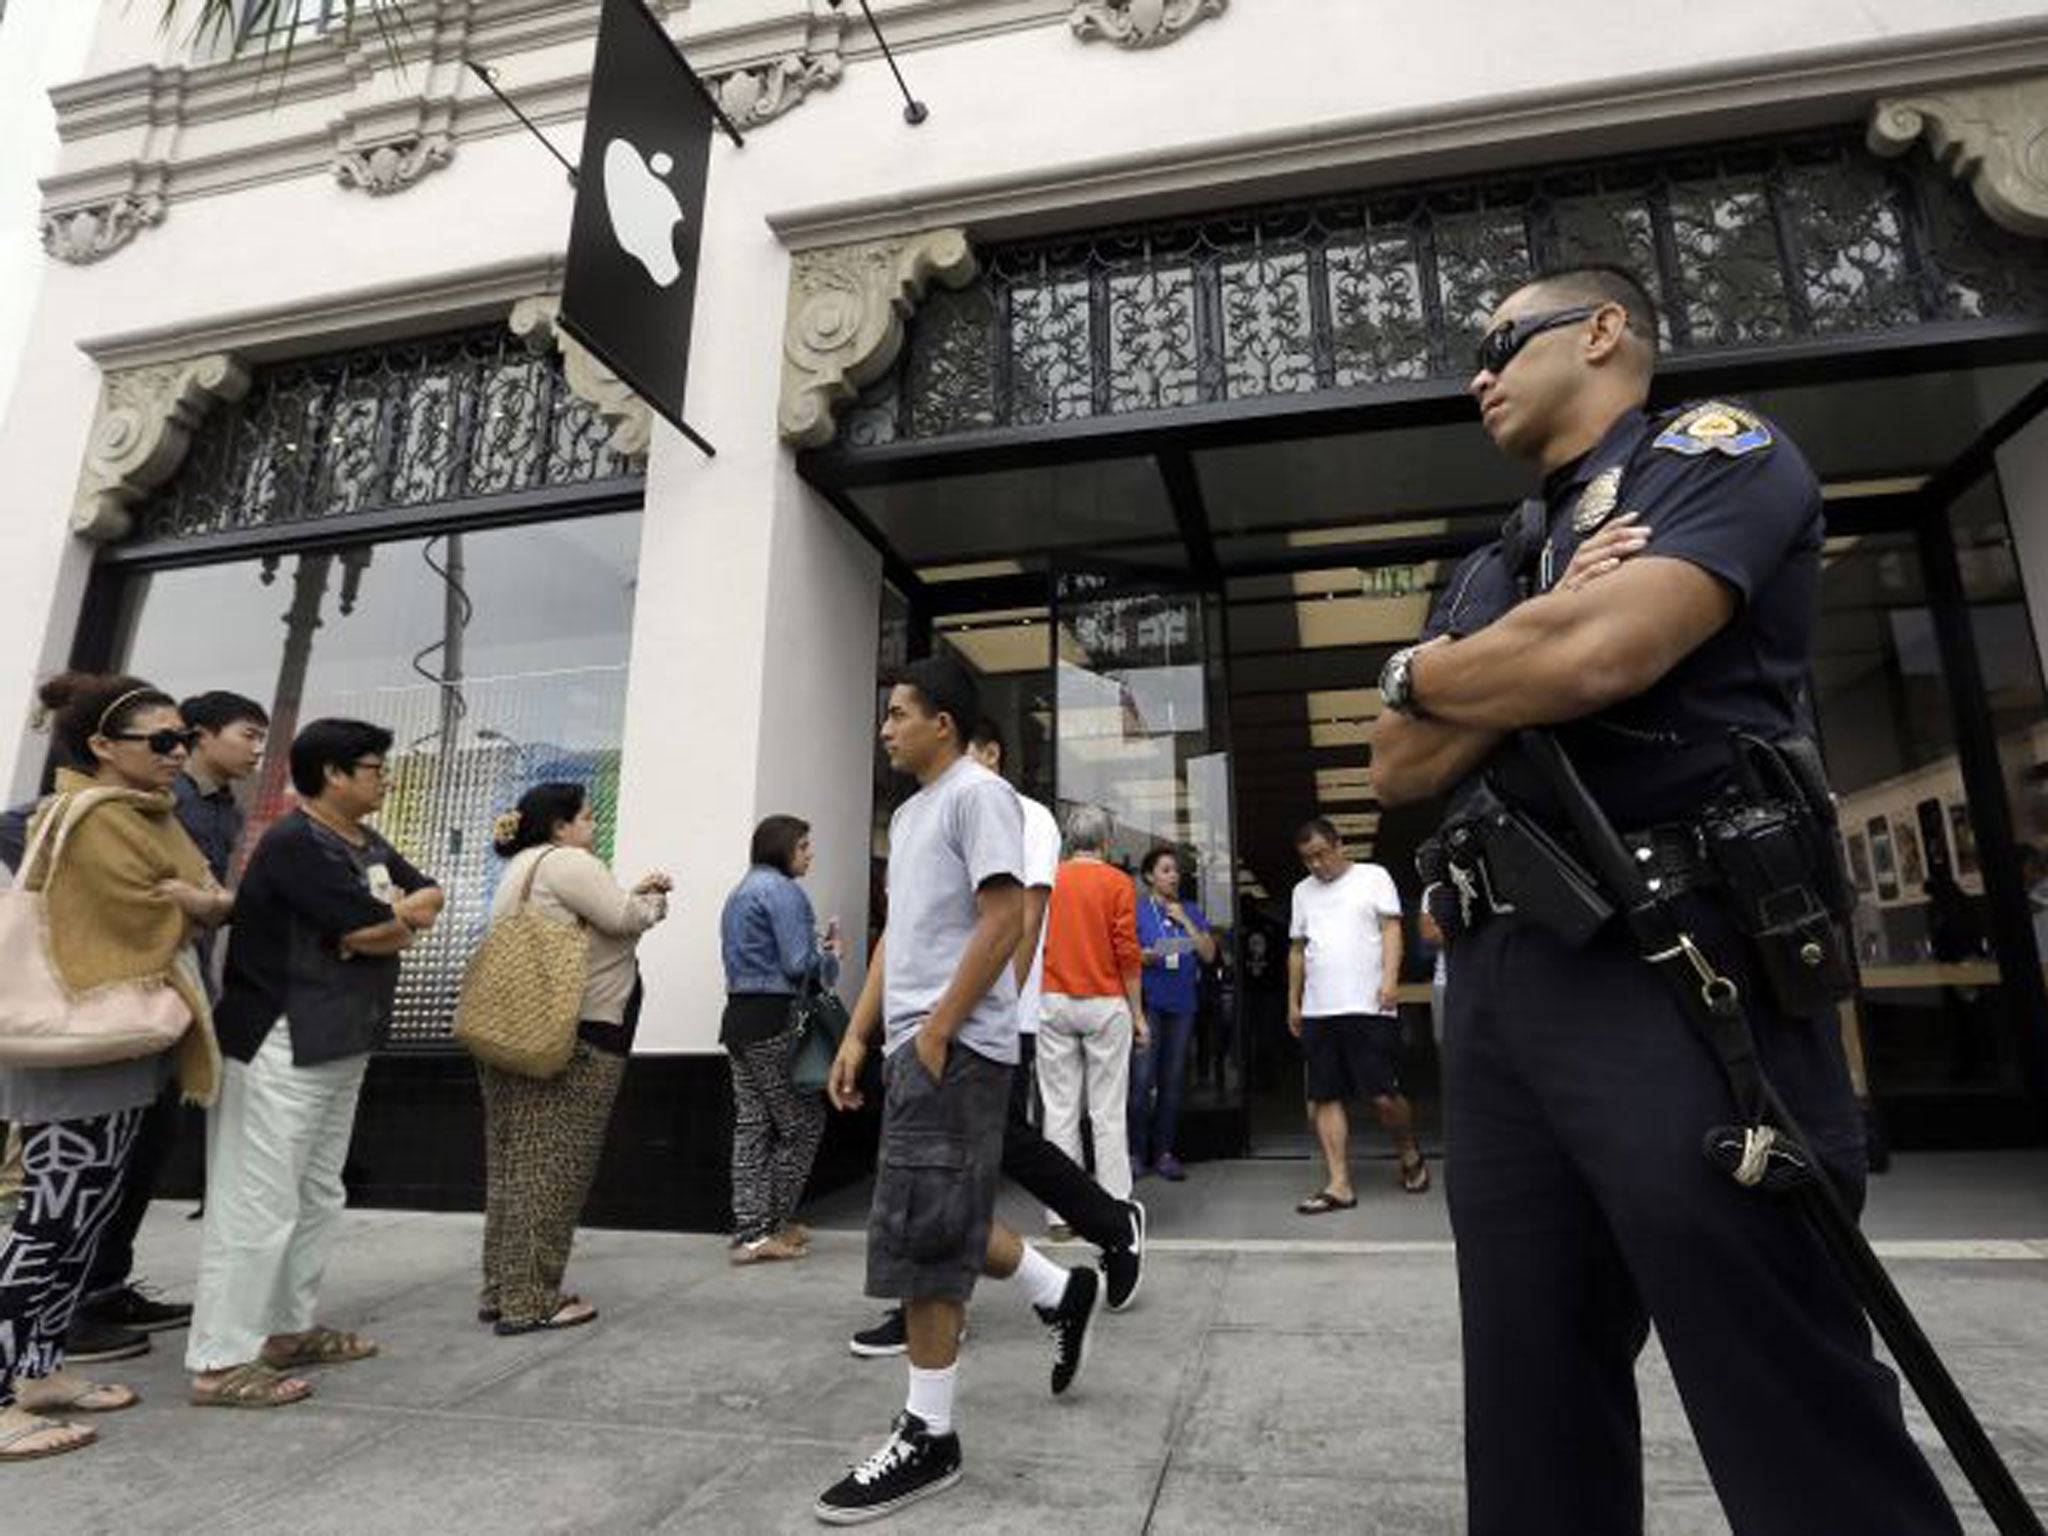 A police officer guards the entrance of the Apple store as customers wait in line for the latest versions of the iPhone during the opening day of sales of the iPhone 5s and iPhone 5C in Pasadena, California